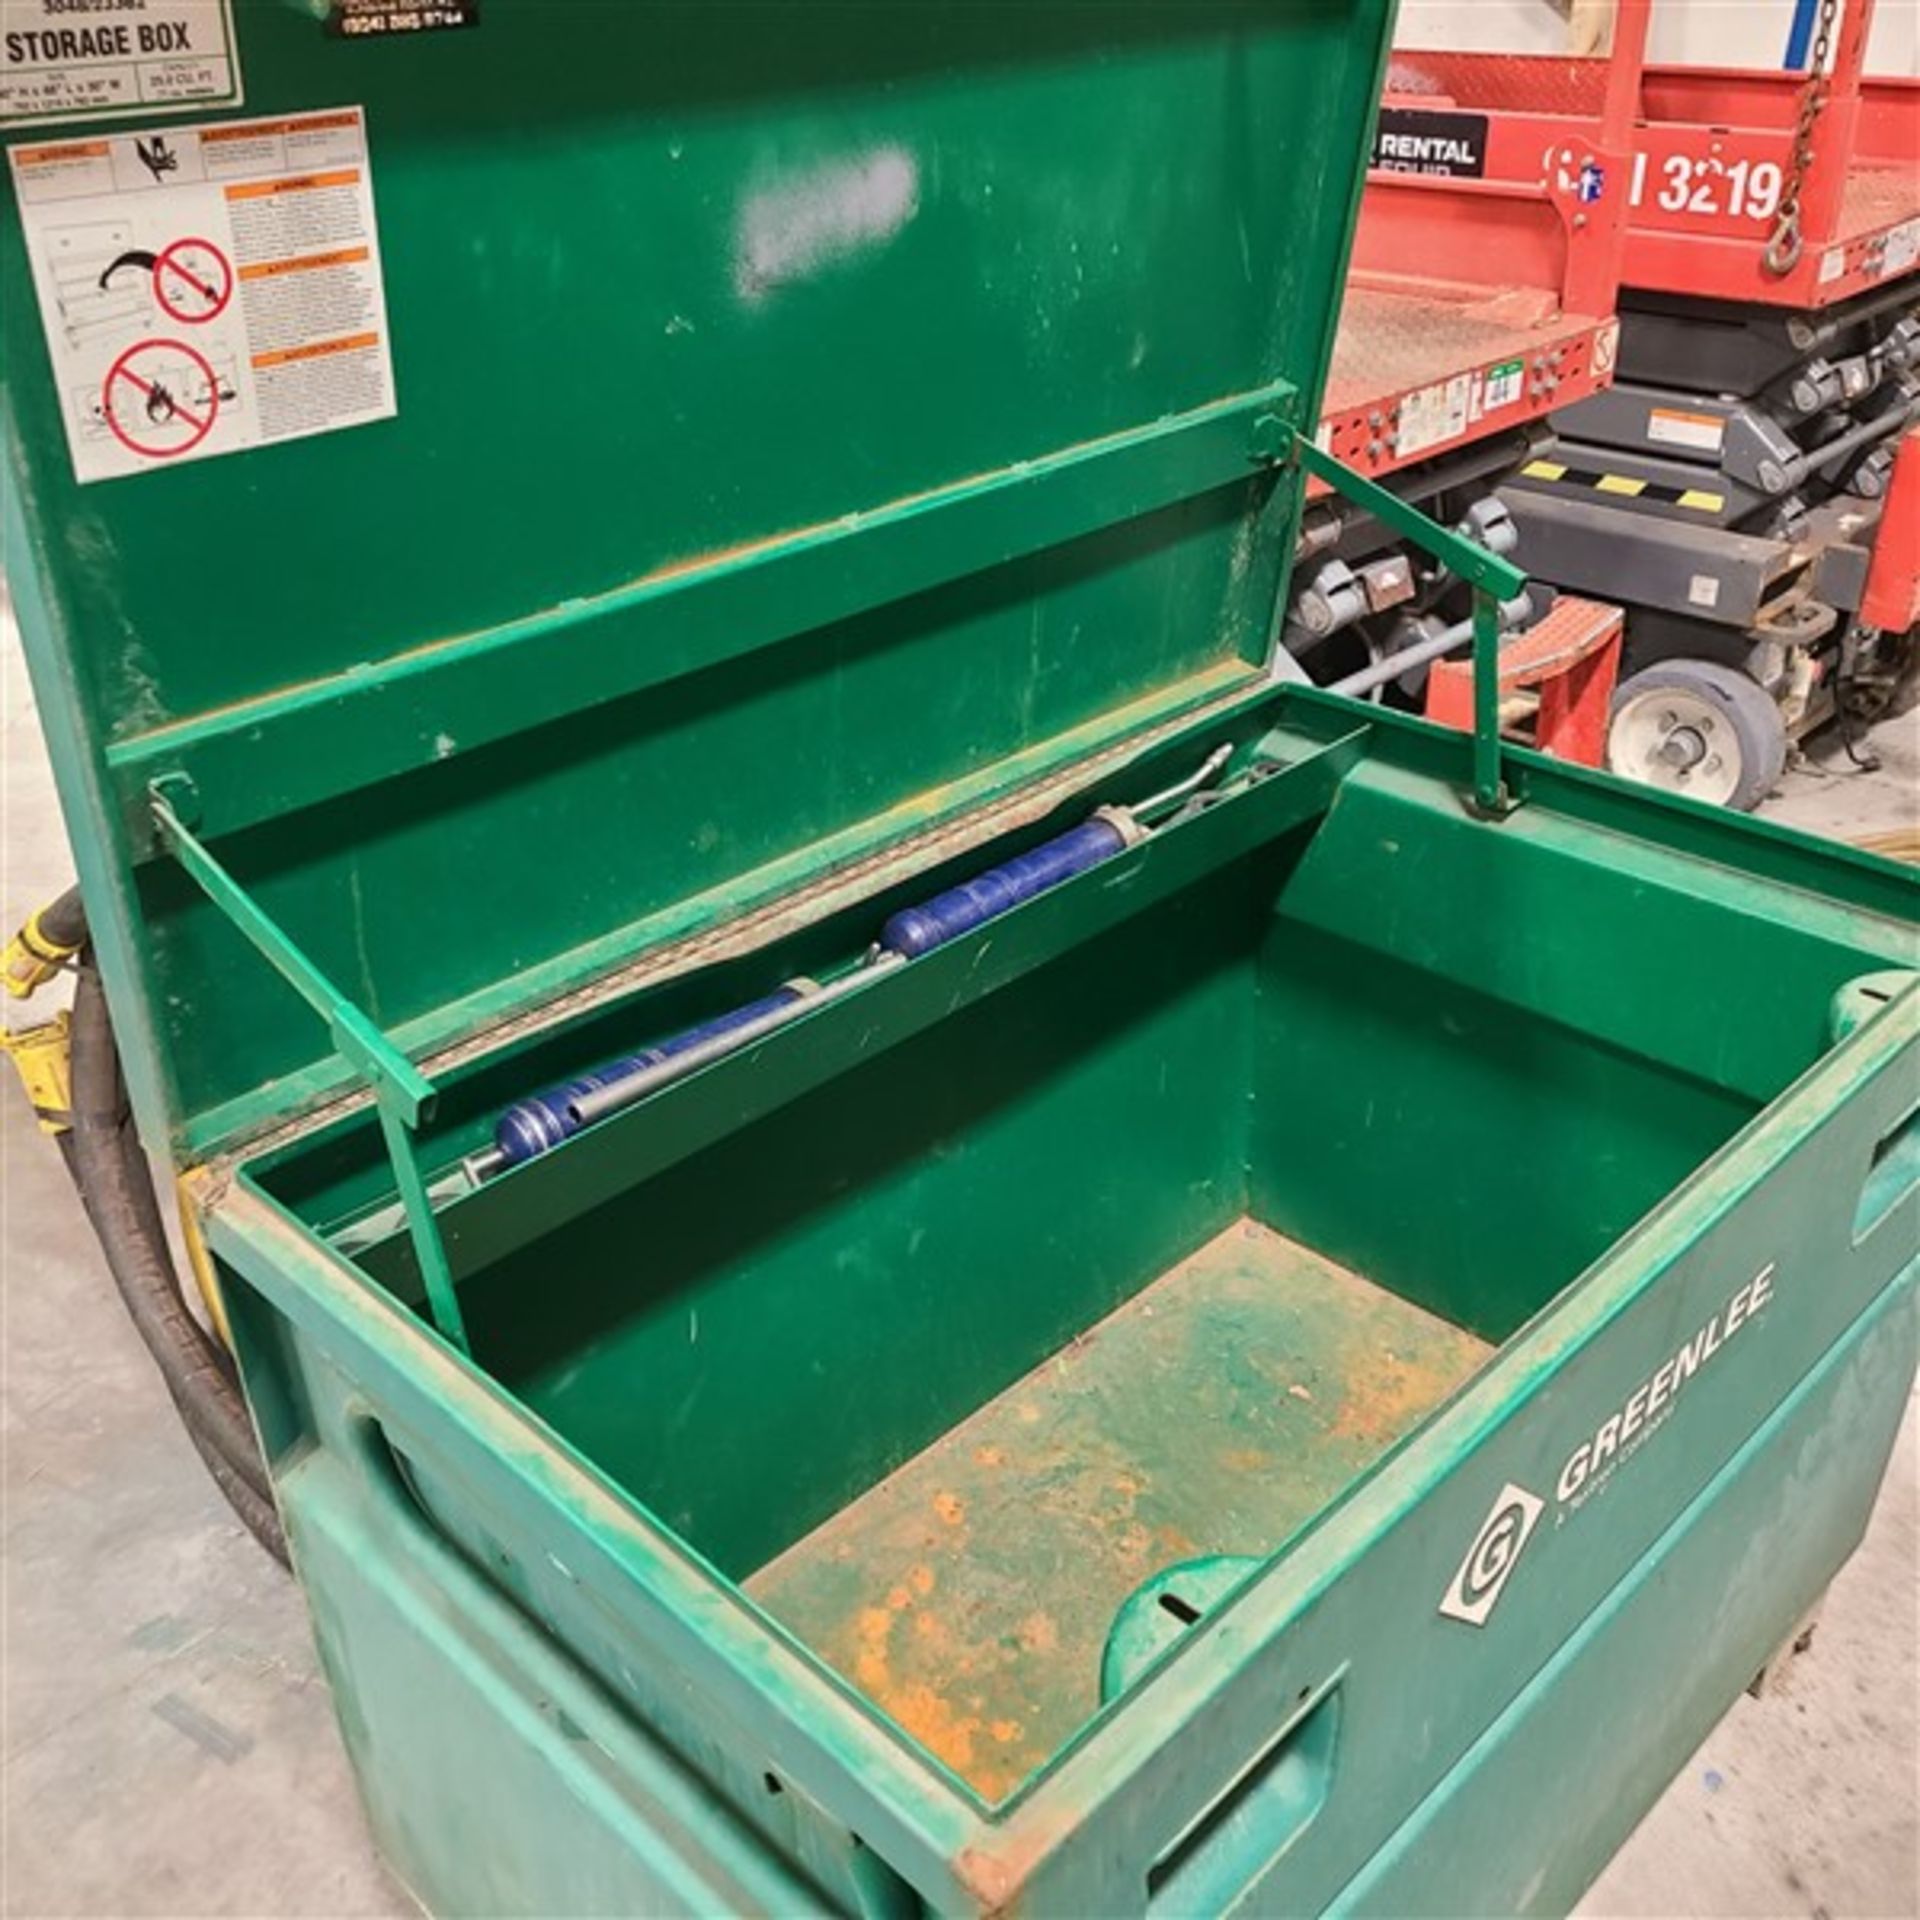 GREENLEE CONSTRUCTION TOOL BOX - Image 2 of 3